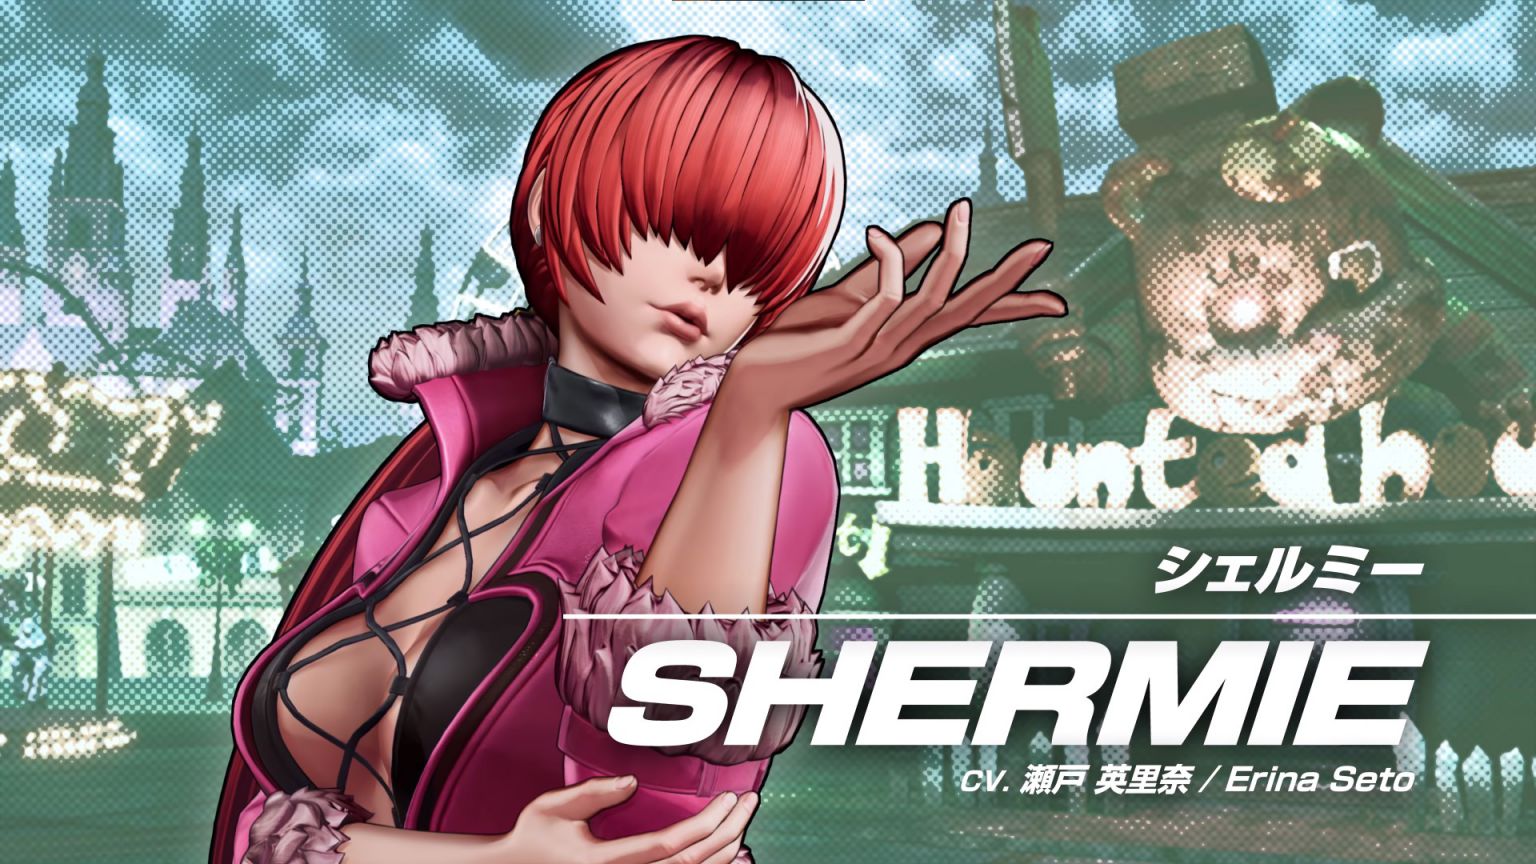 shermie - king of fighters 15 - generacion xbox